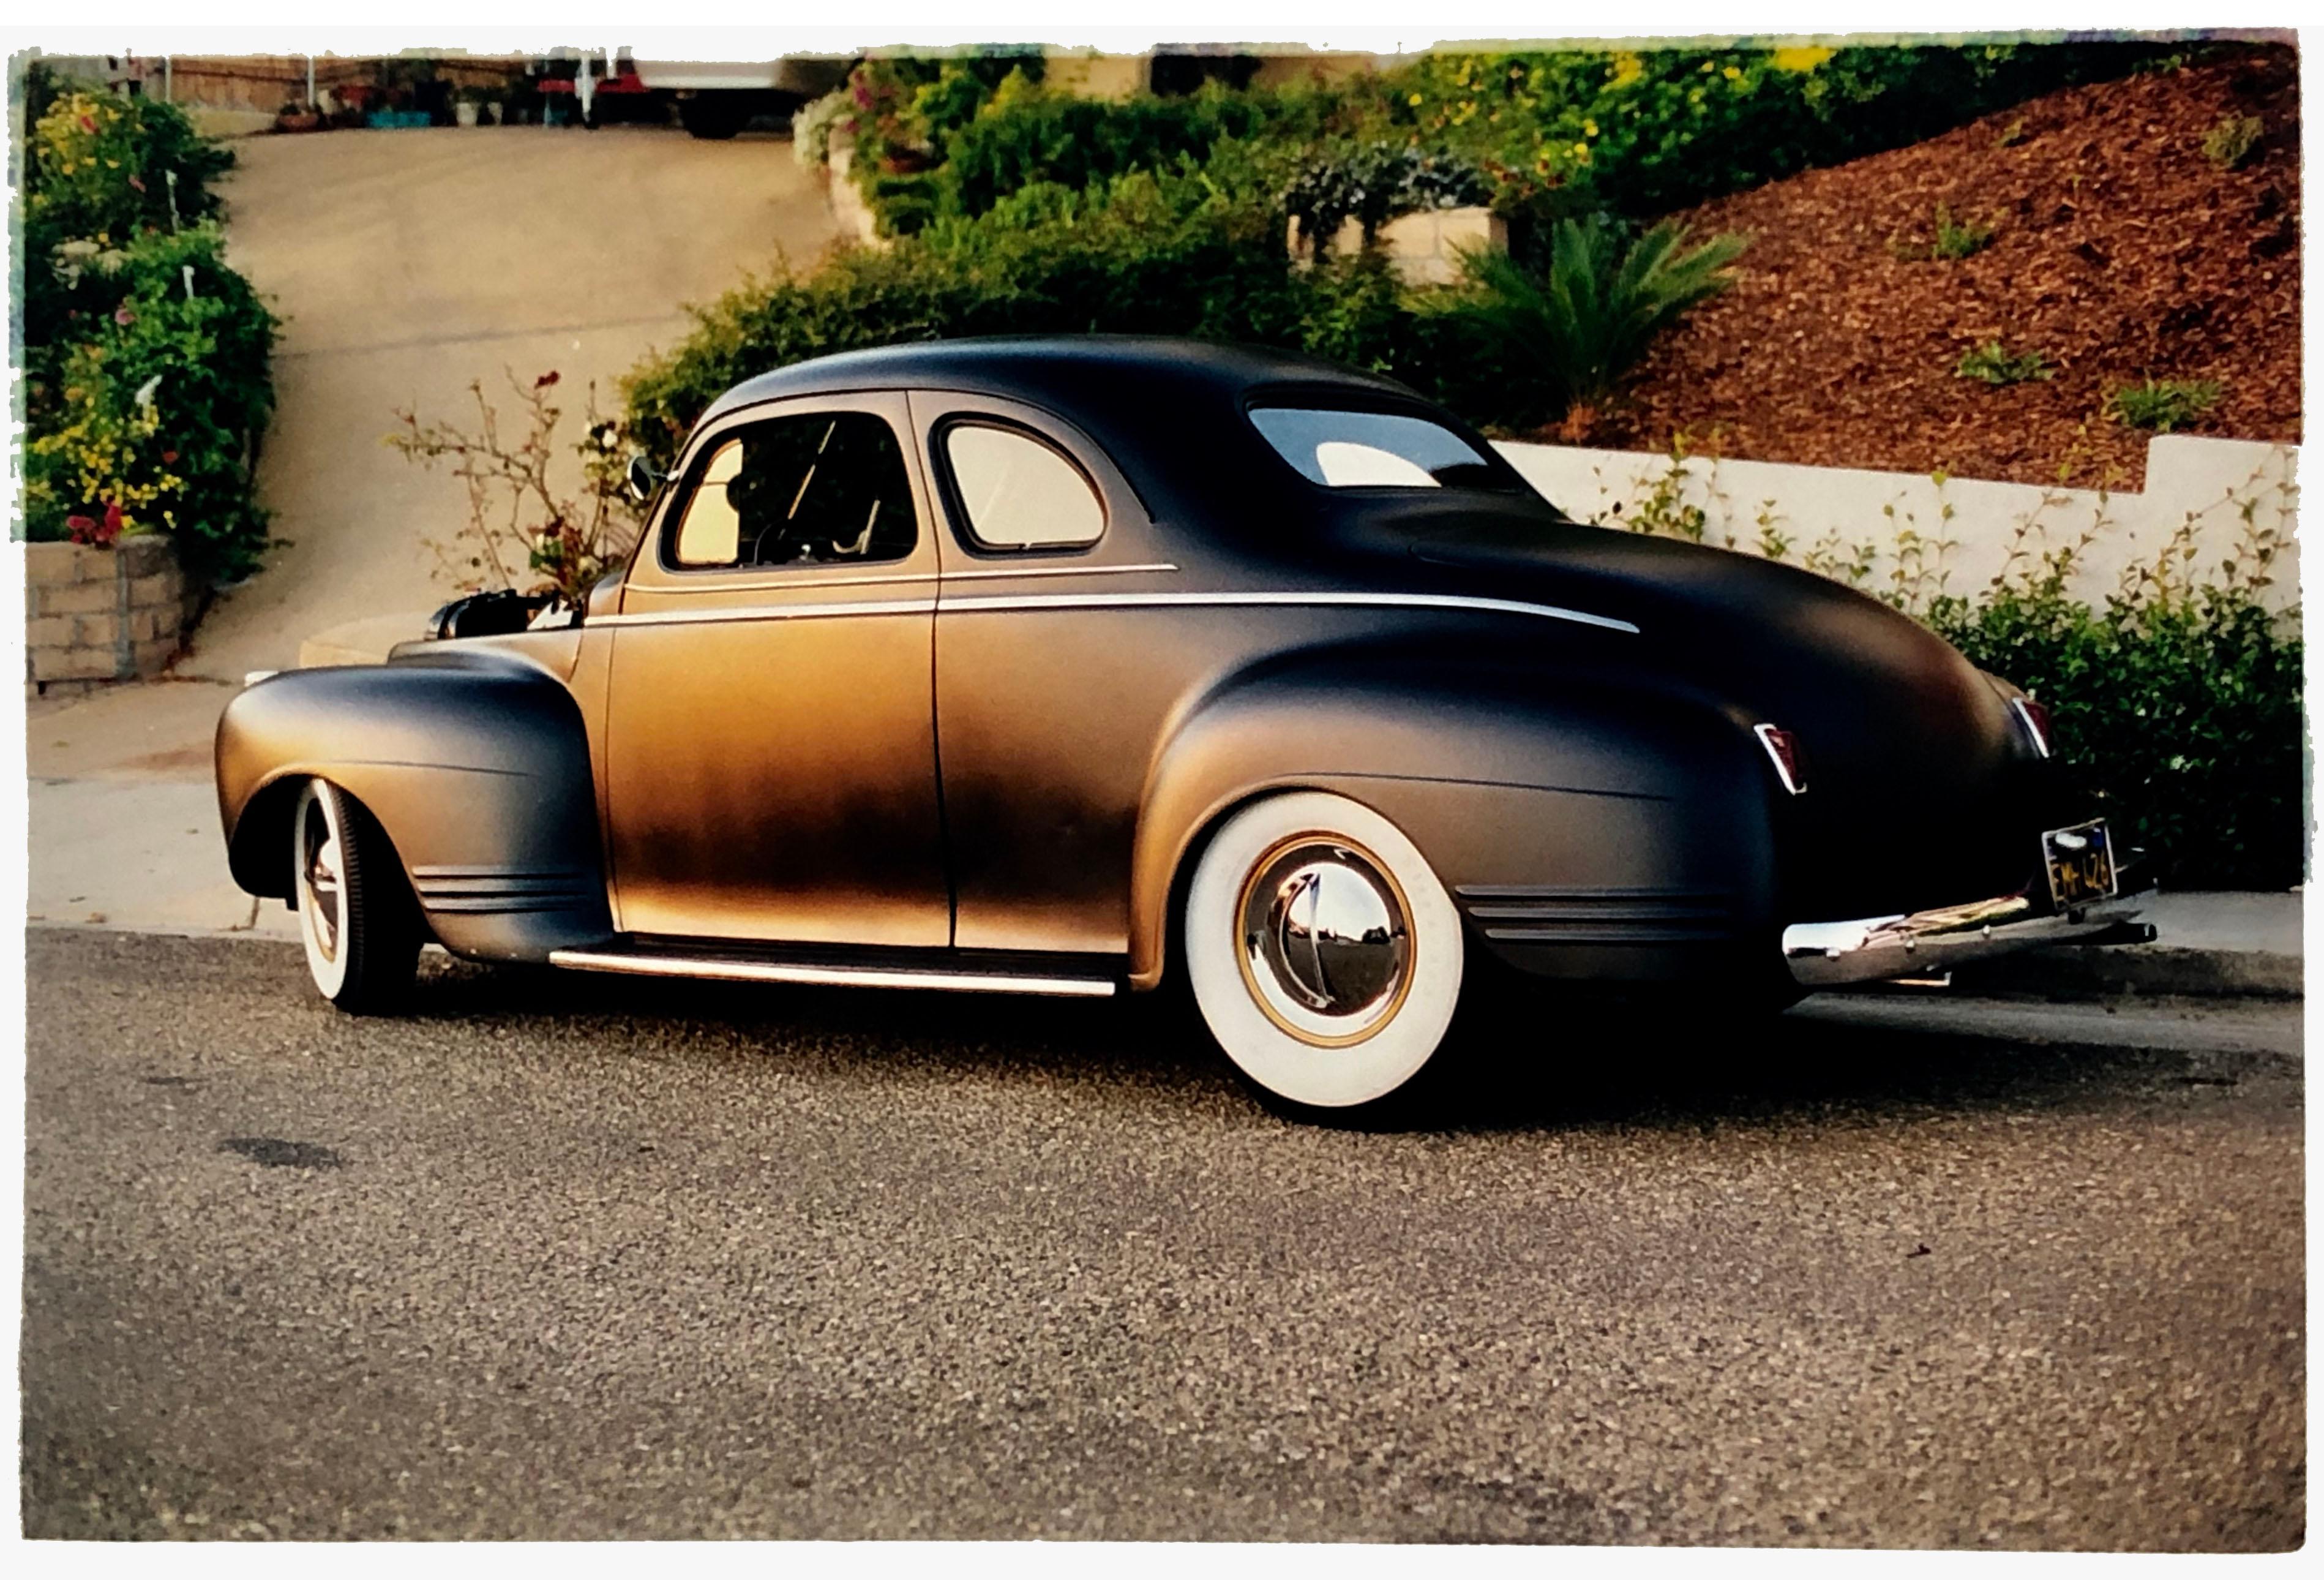 Richard Heeps Color Photograph – Shelly's '41 Plymouth, Kalifornien - Dream in Color Serie - Vintage-Auto-Foto